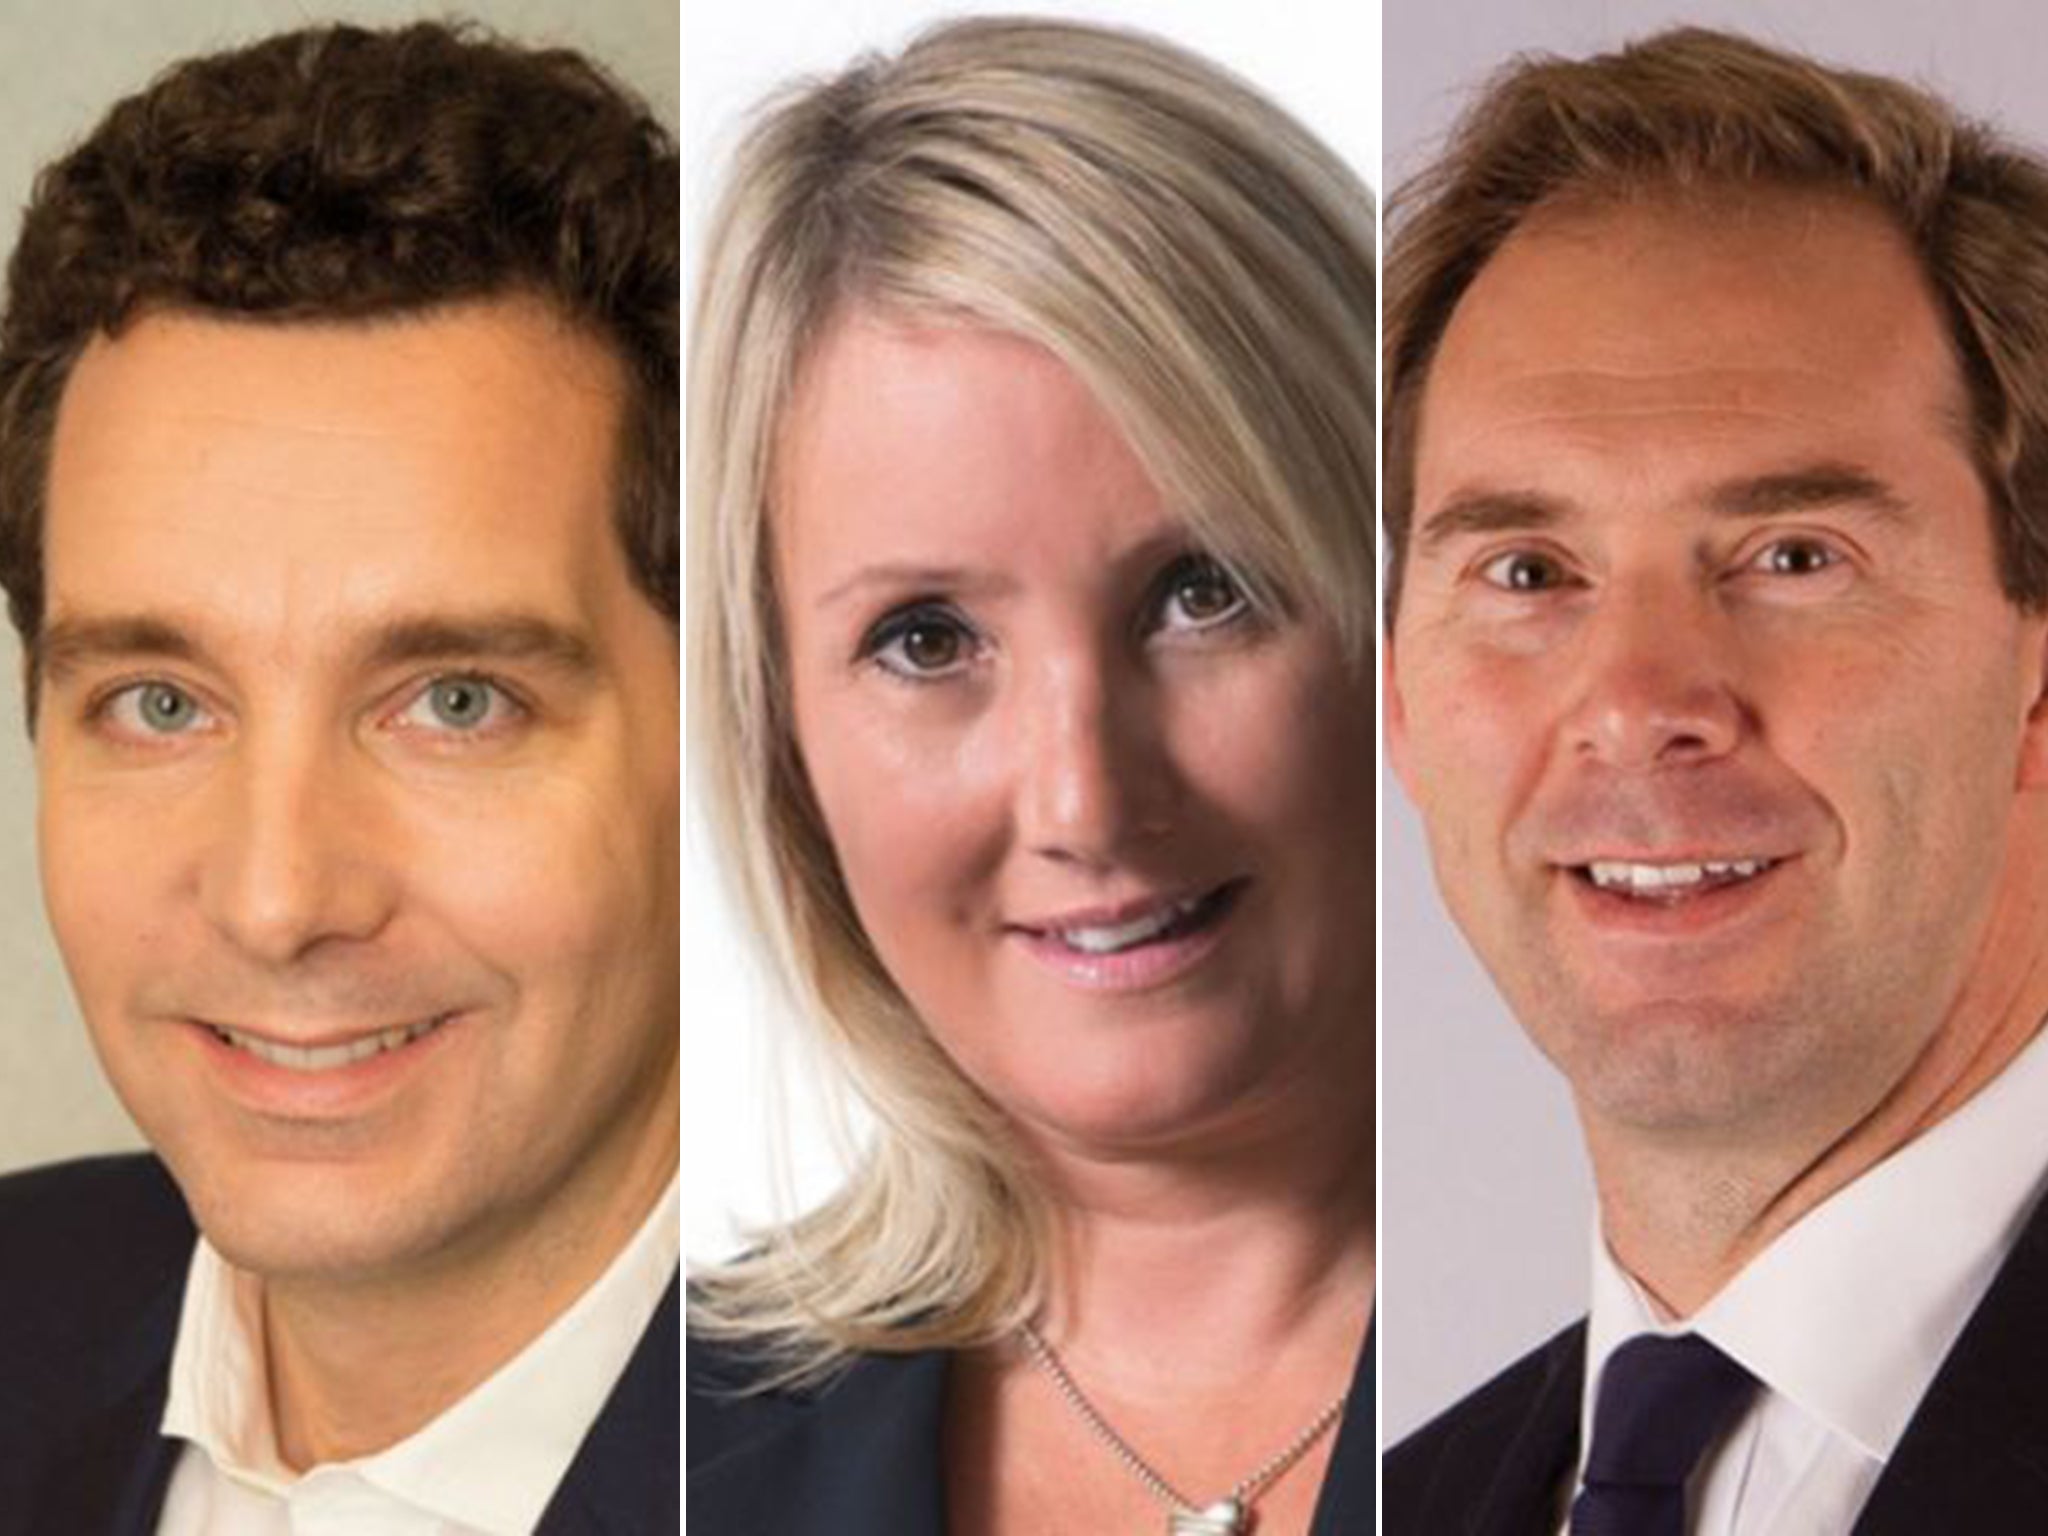 From left to right: Edward Timpson, Caroline Dinenage and Tobias Ellwood, the three ministers who have been ordered to pay back taxpayers’ money